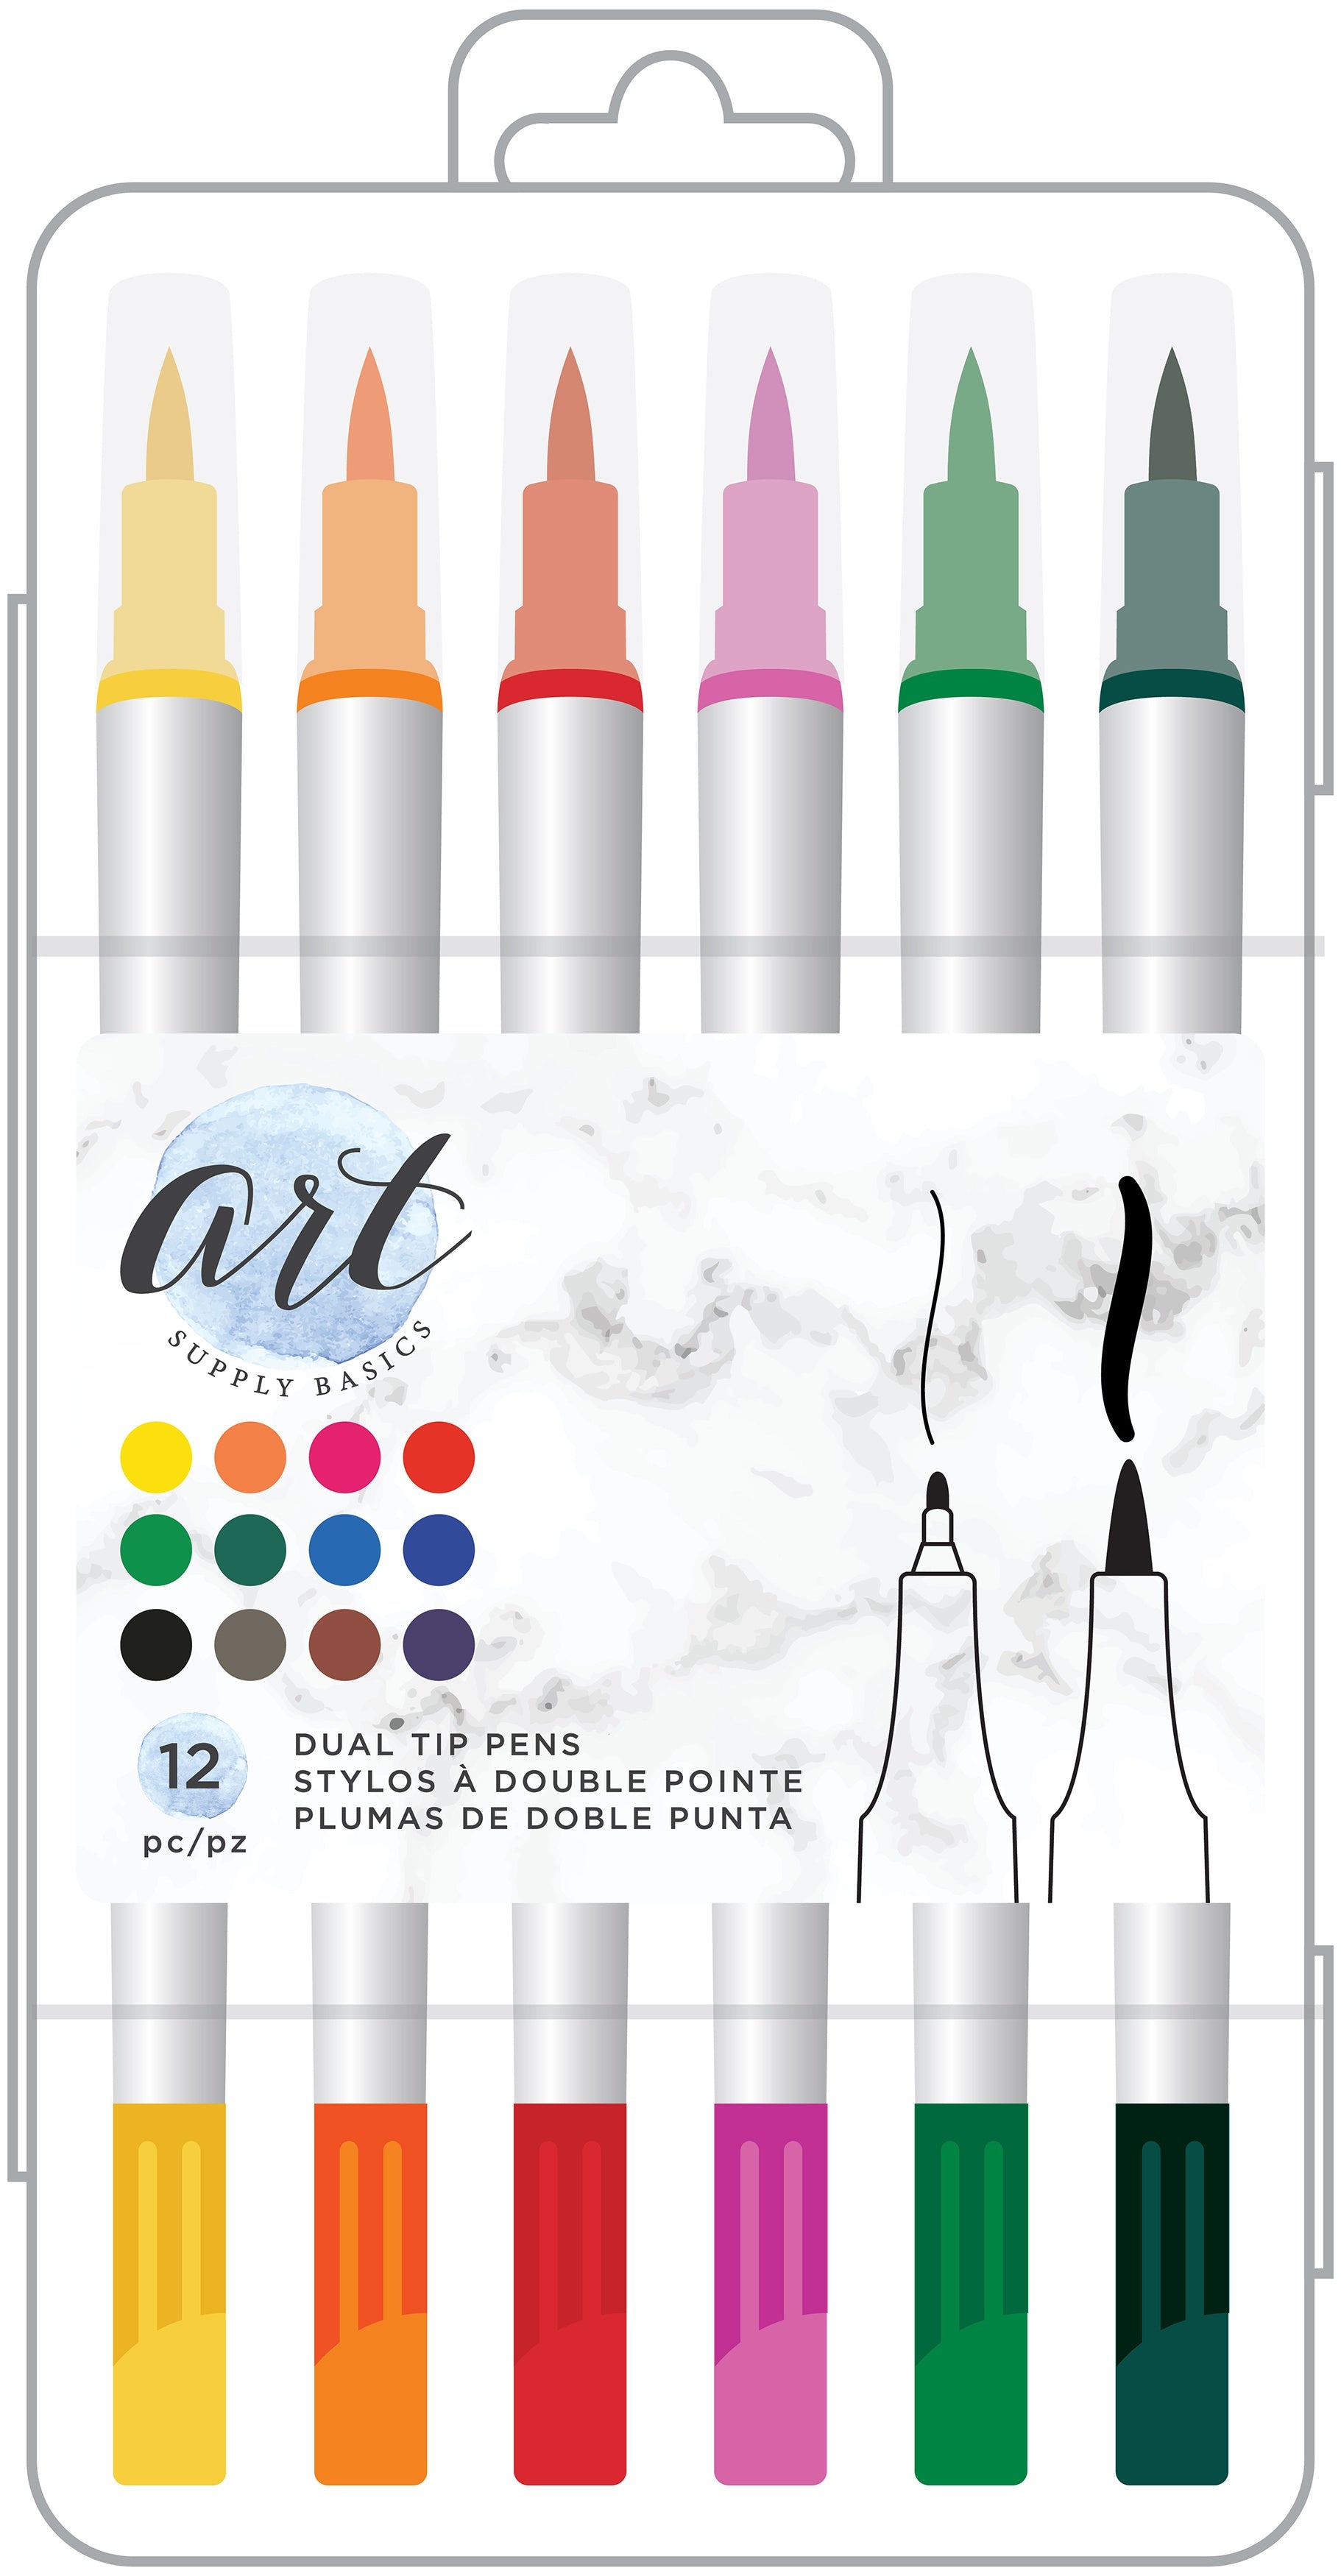 American Crafts Dual Color Markers